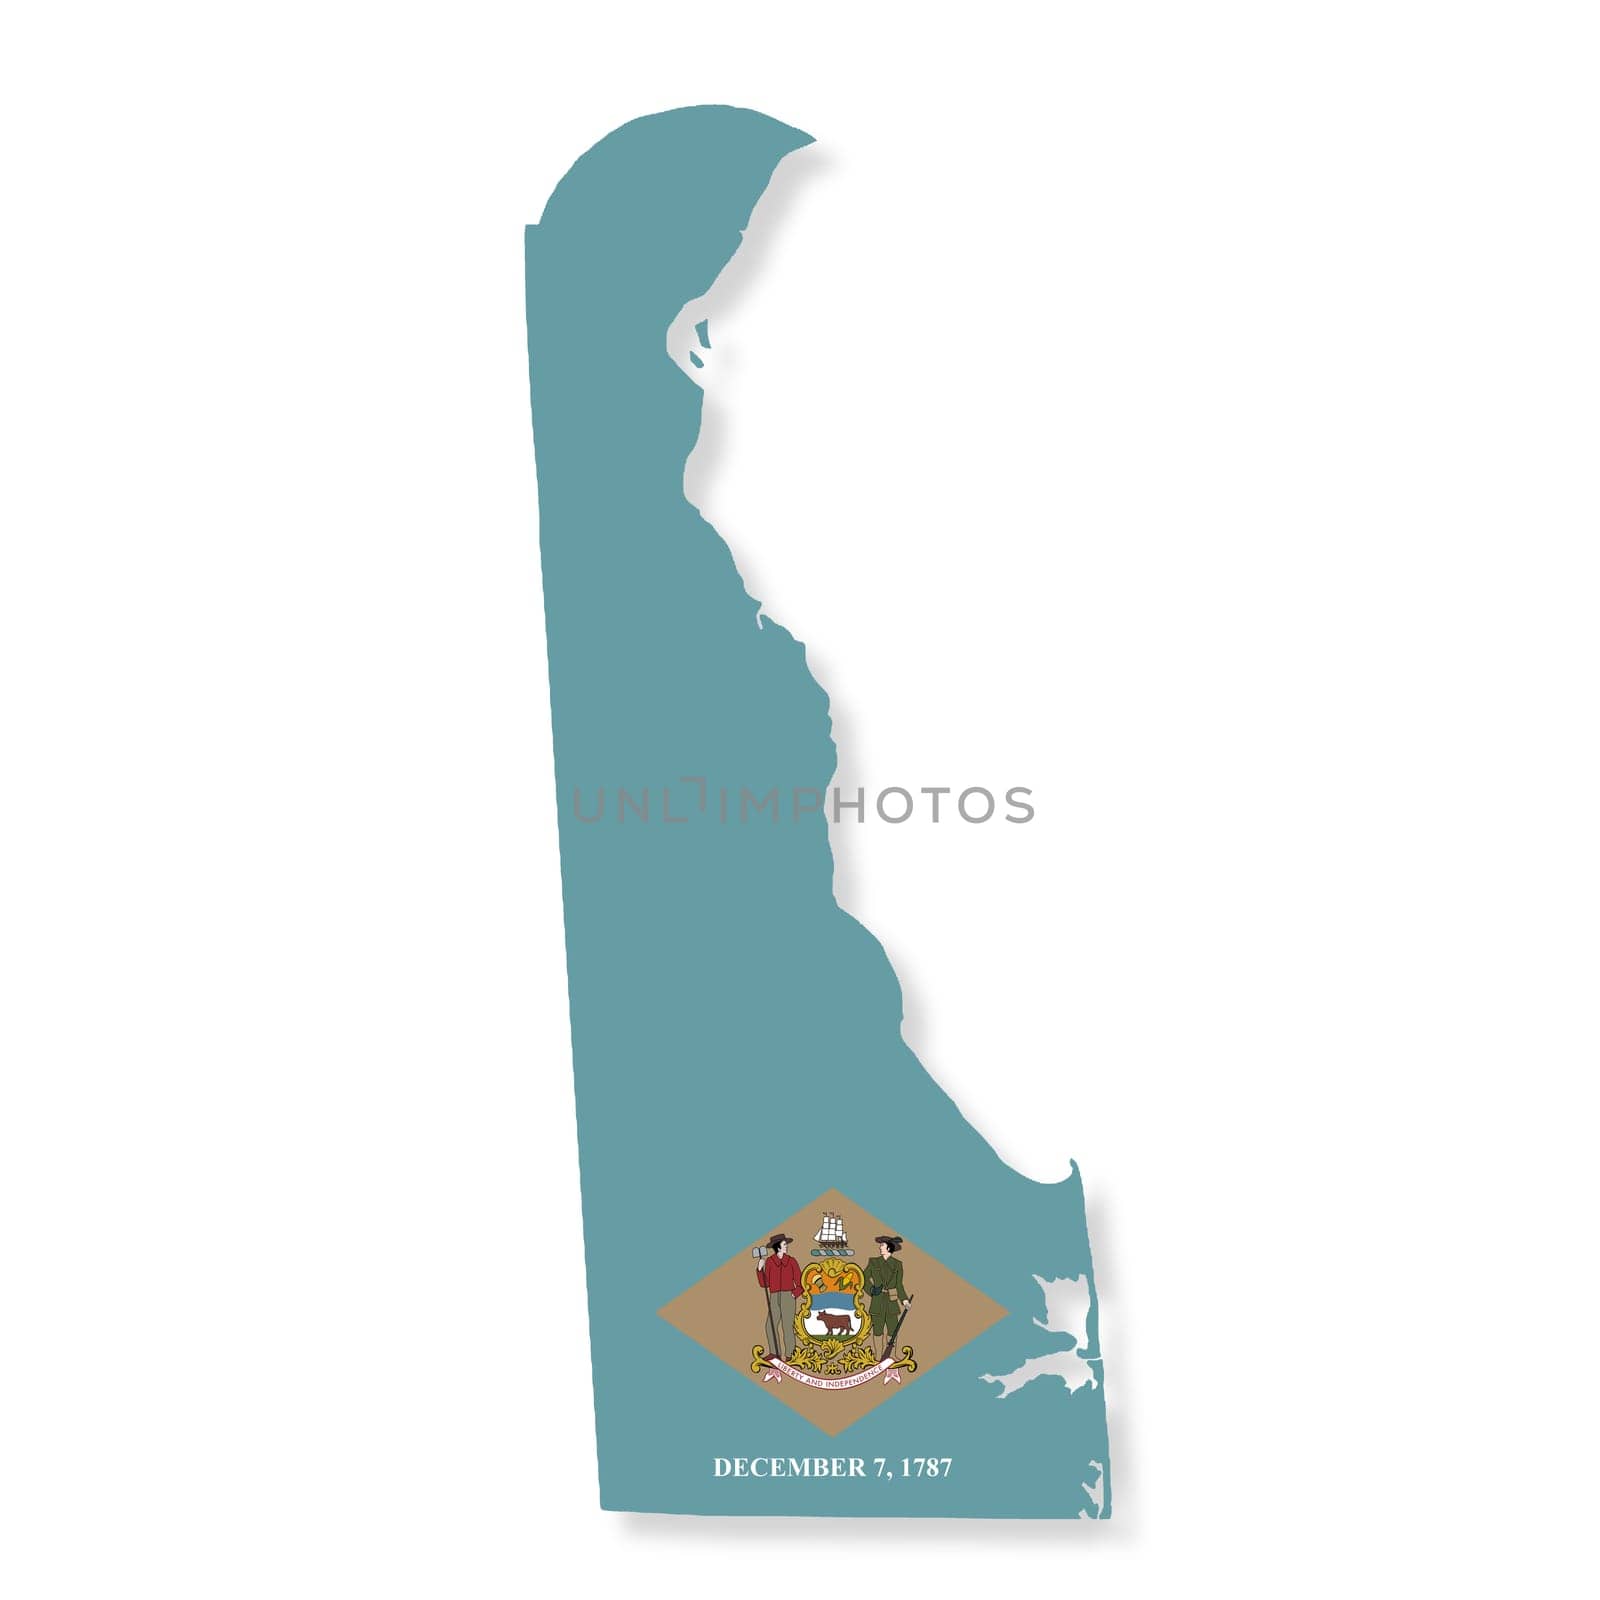 A Delaware State Flag Map Illustration with clipping path